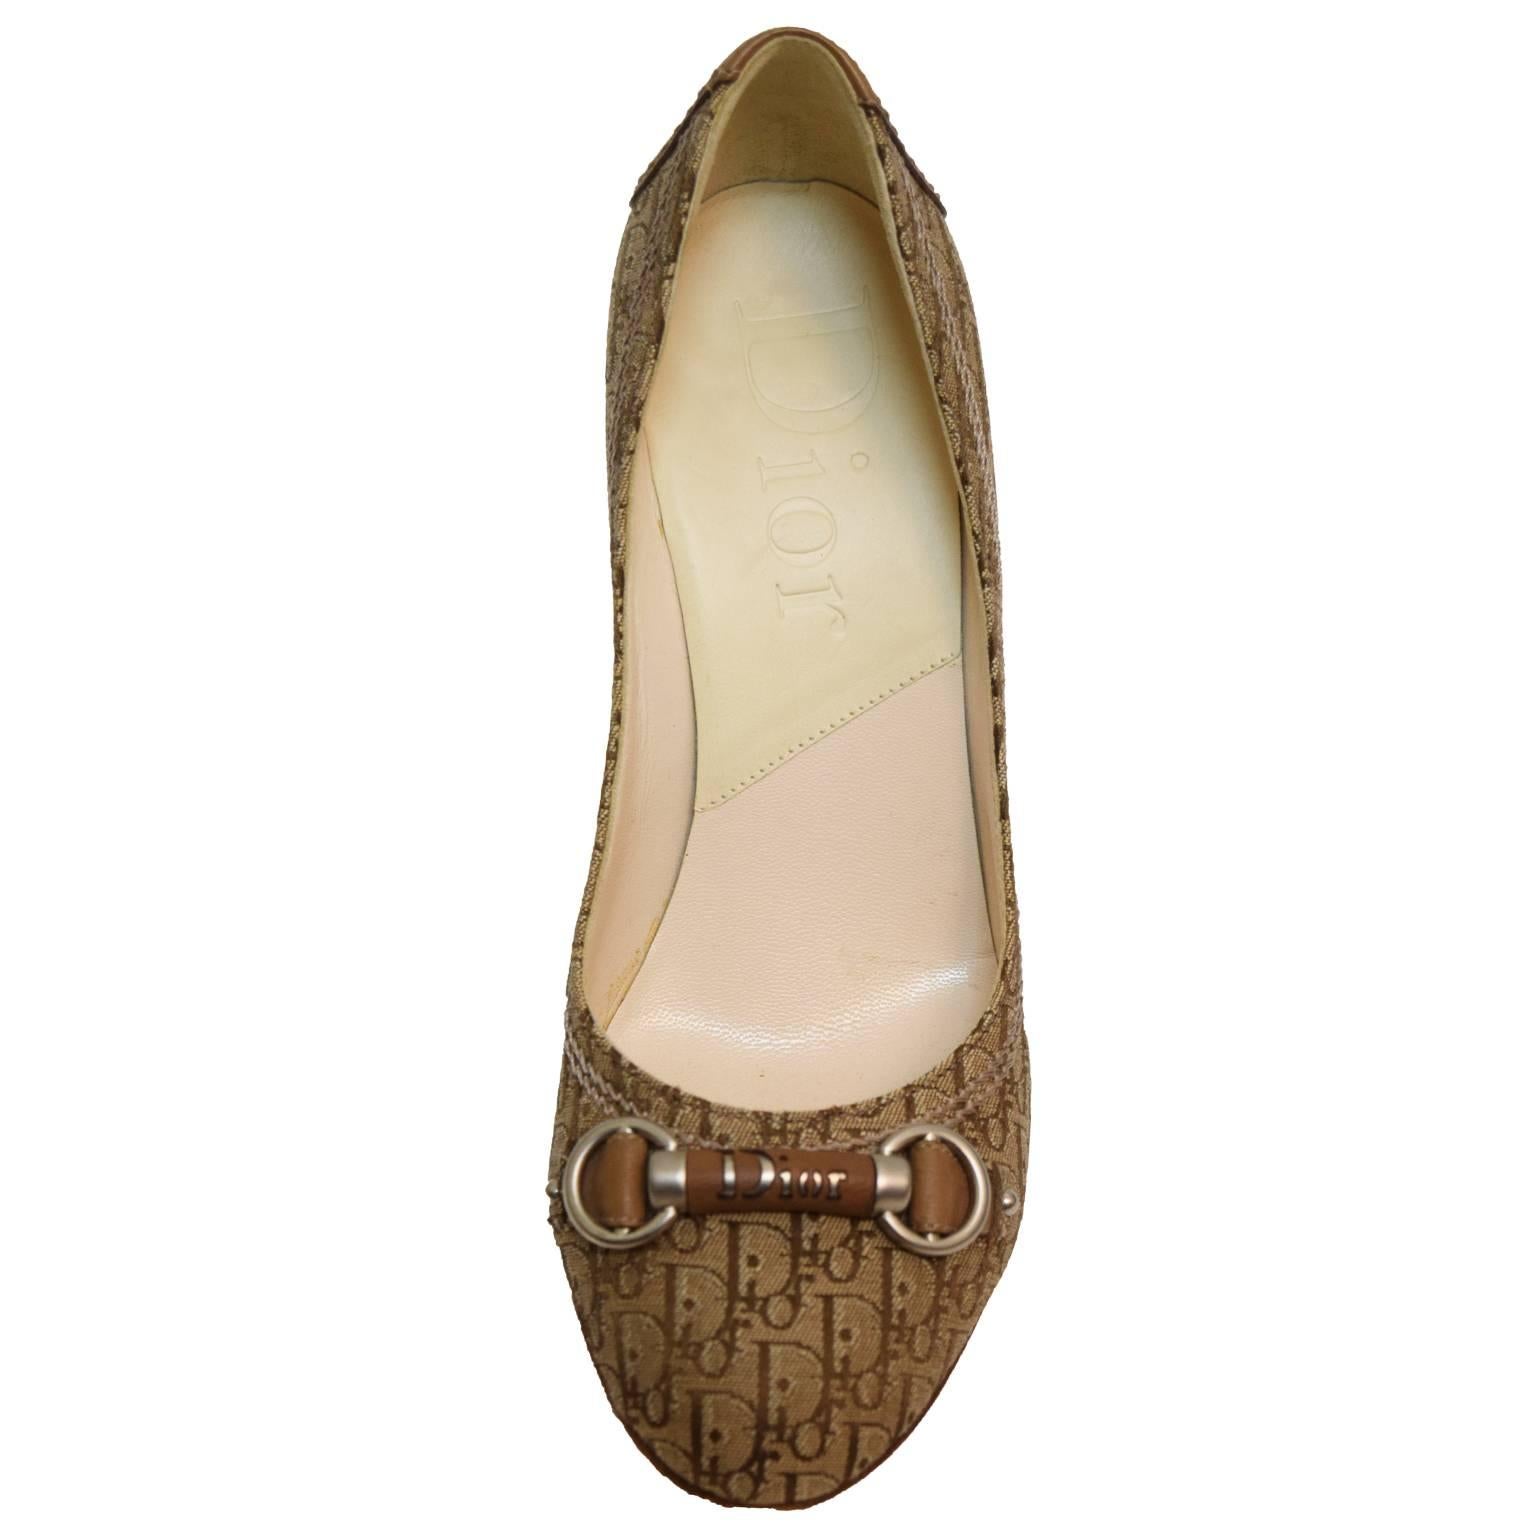 Now if you are looking for the classic Dior signature look, these Pumps are just for you. Covered in the Dior logo monogramed canvas in nude, with a leather buckle at the toe box engraved in silver hardware with the classic Dior logo. Dark wooden